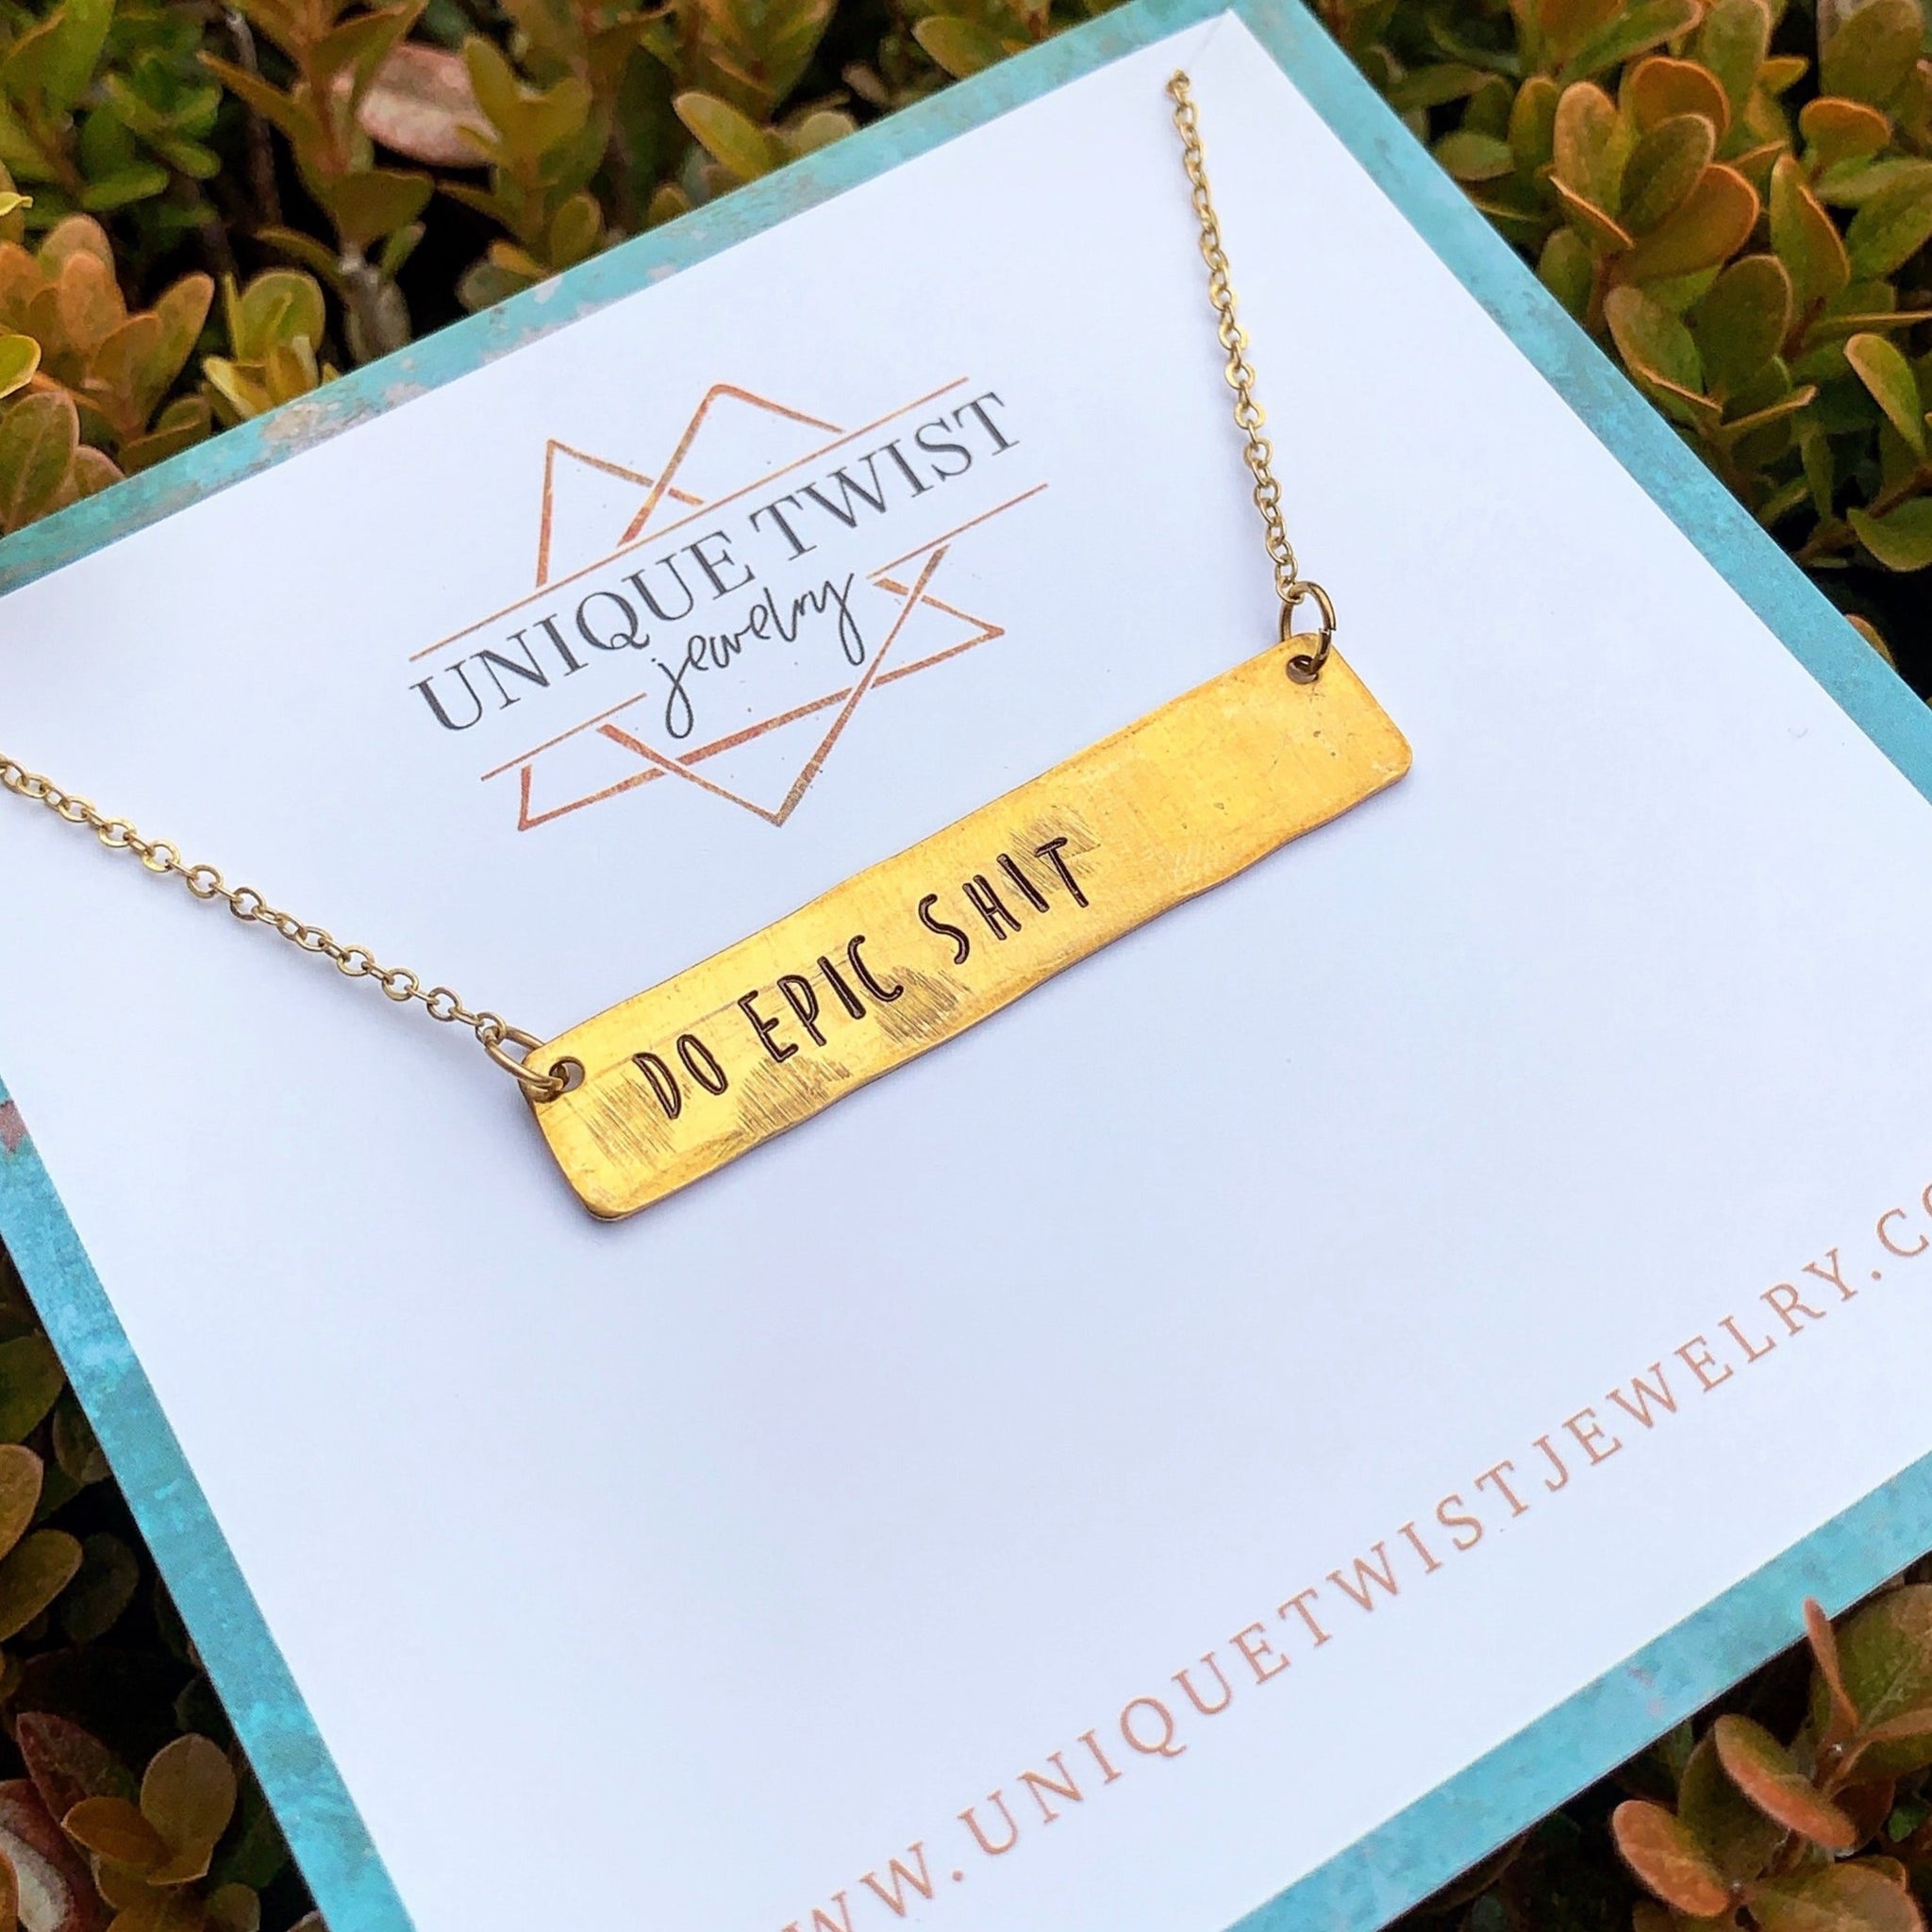 "Do Epic Shit" Handstamped Bar Necklace. Handmade jewelry by Unique Twist Jewelry.